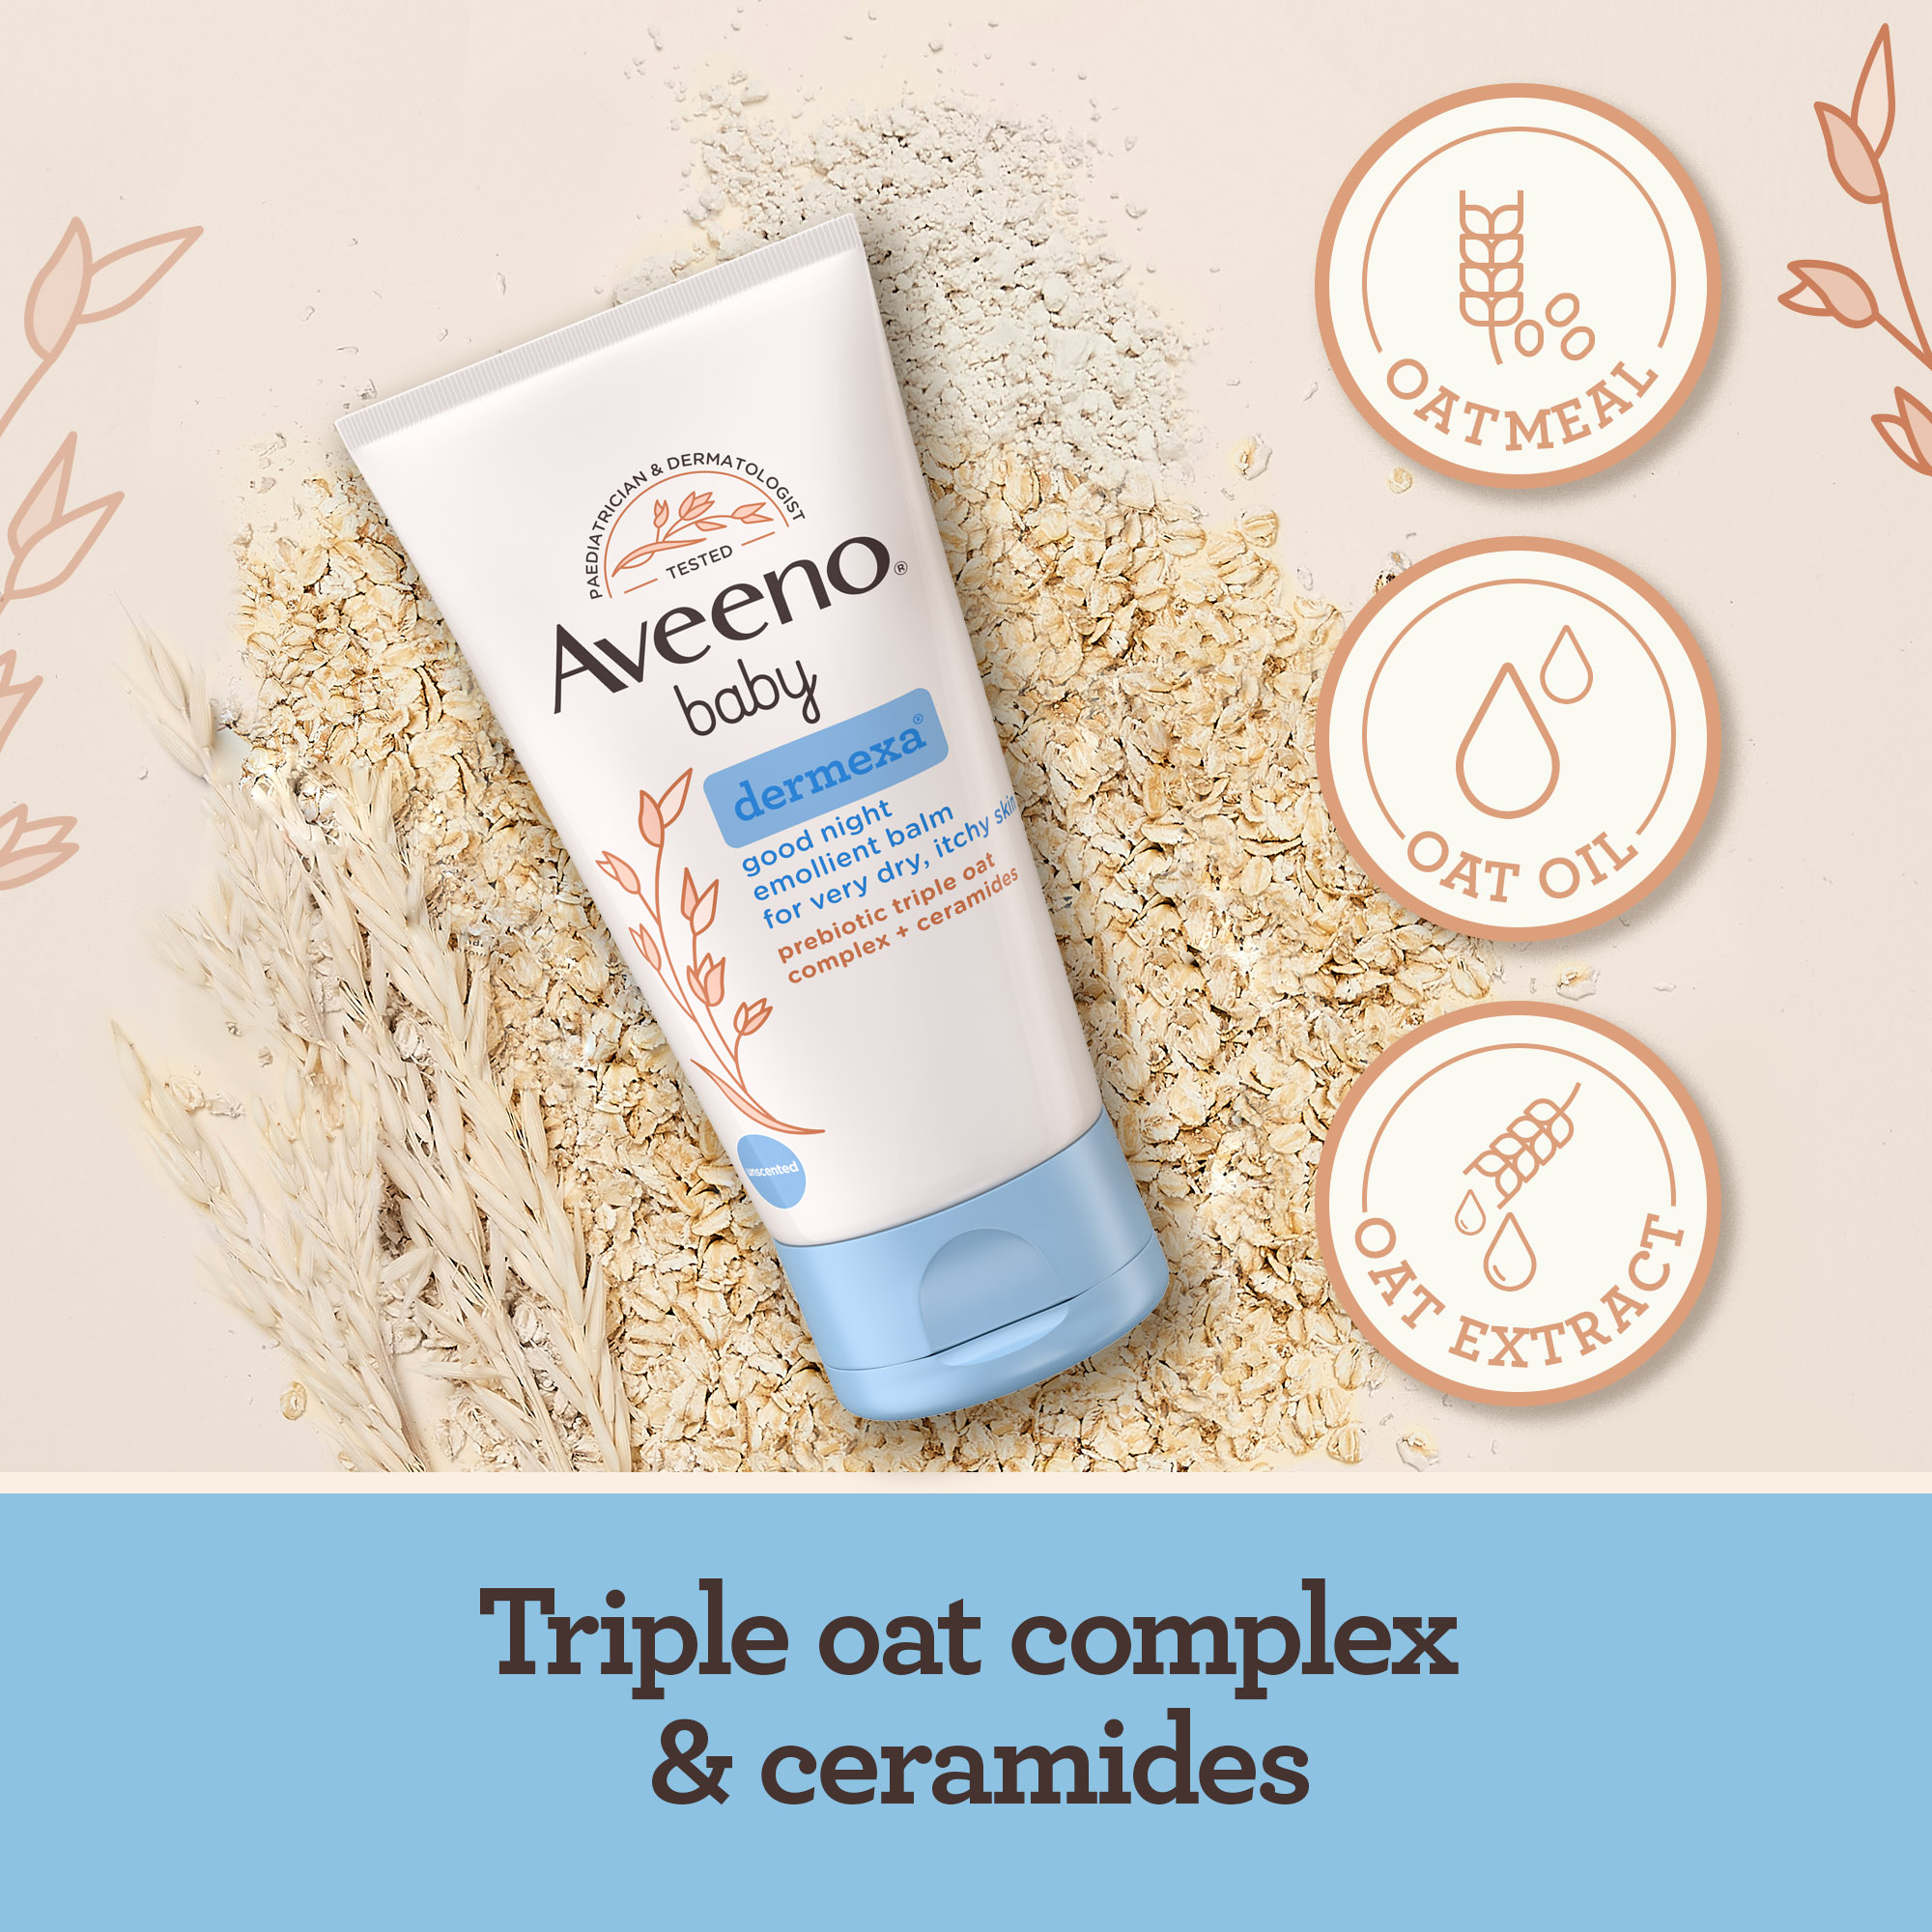 AVEENO® BABY DERMEXA GOOD NIGHT EMOLLIENT BALM WITH TRIPLE OAT COMPLEX - OATMEAL, OAT OIL AND OAT EXTRACT & CERAMIDES